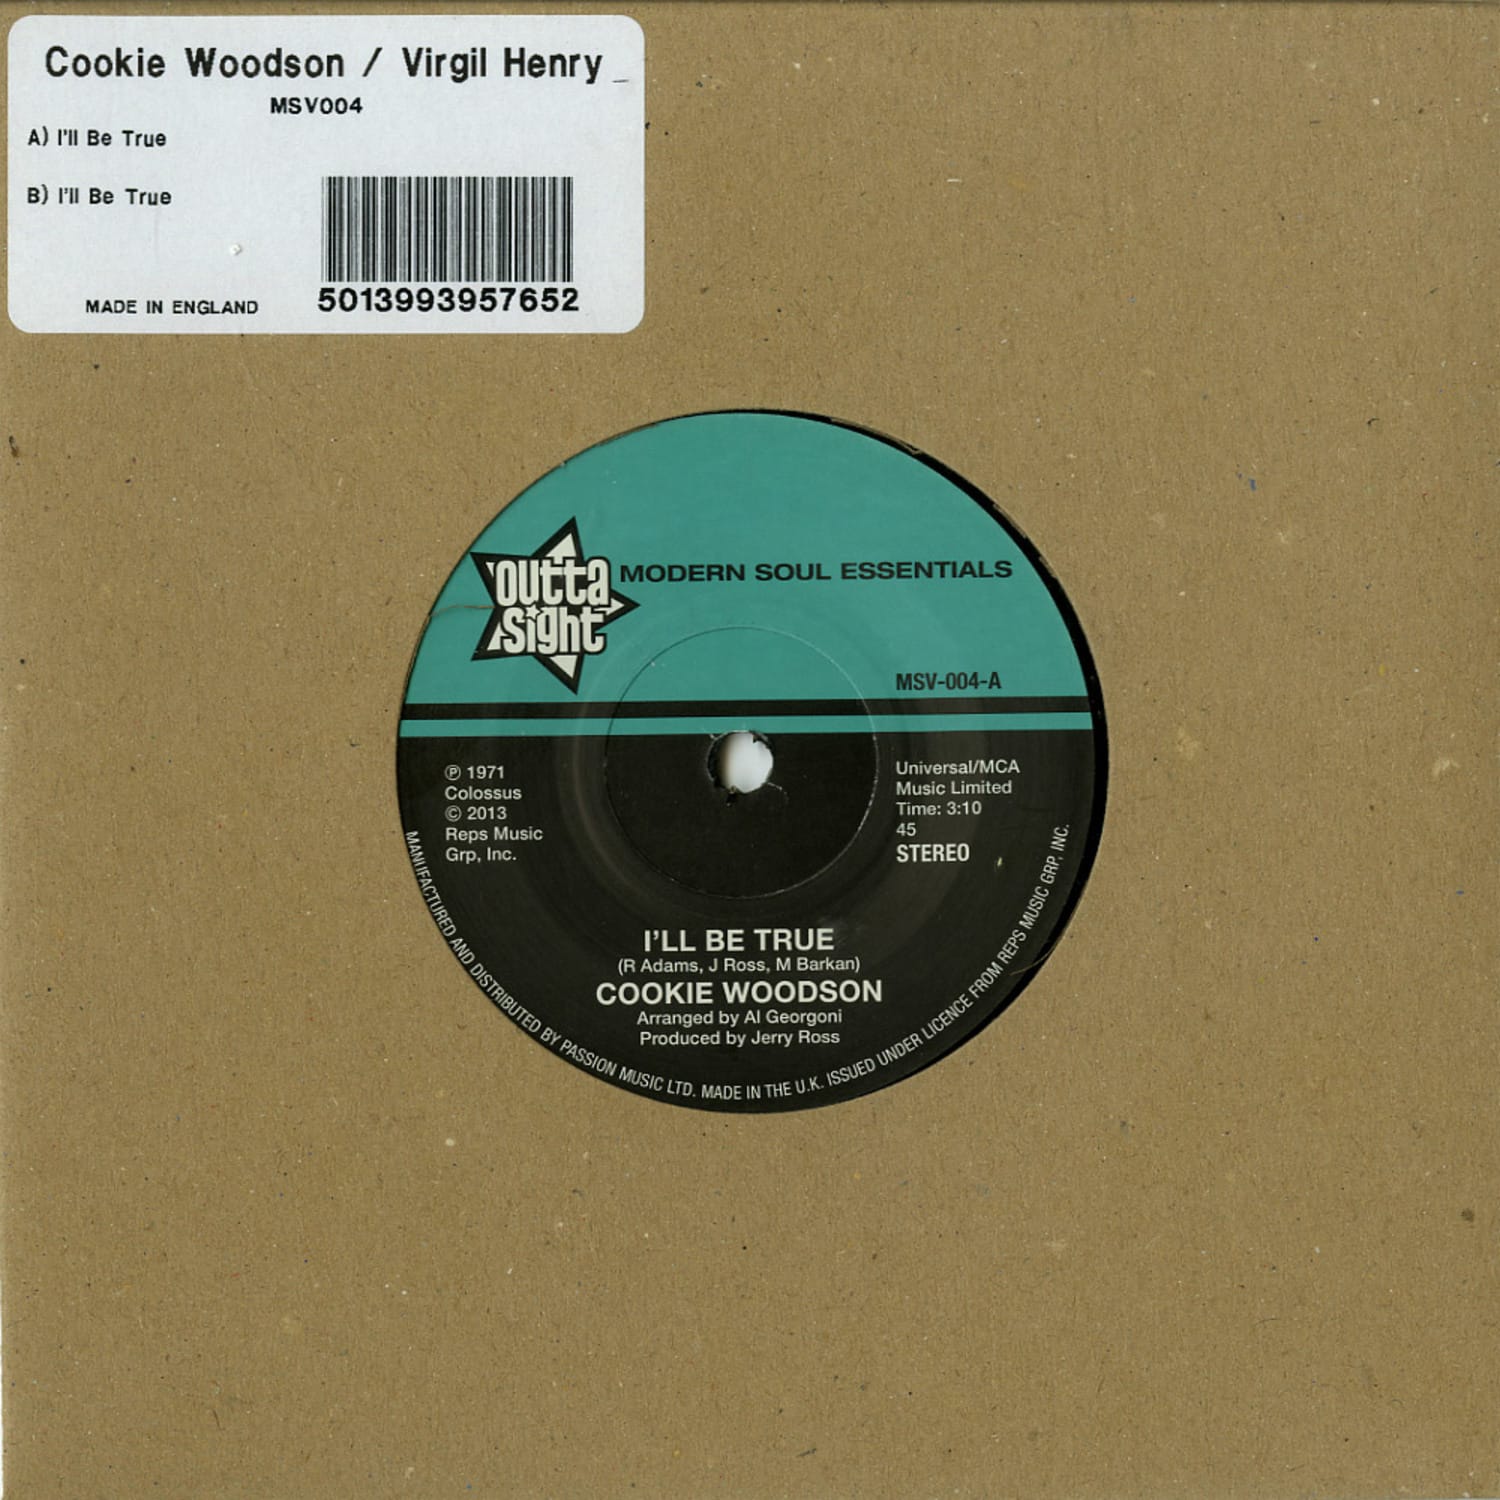 Cookie Woodson / Virgil Henry - I LL BE TRUE 